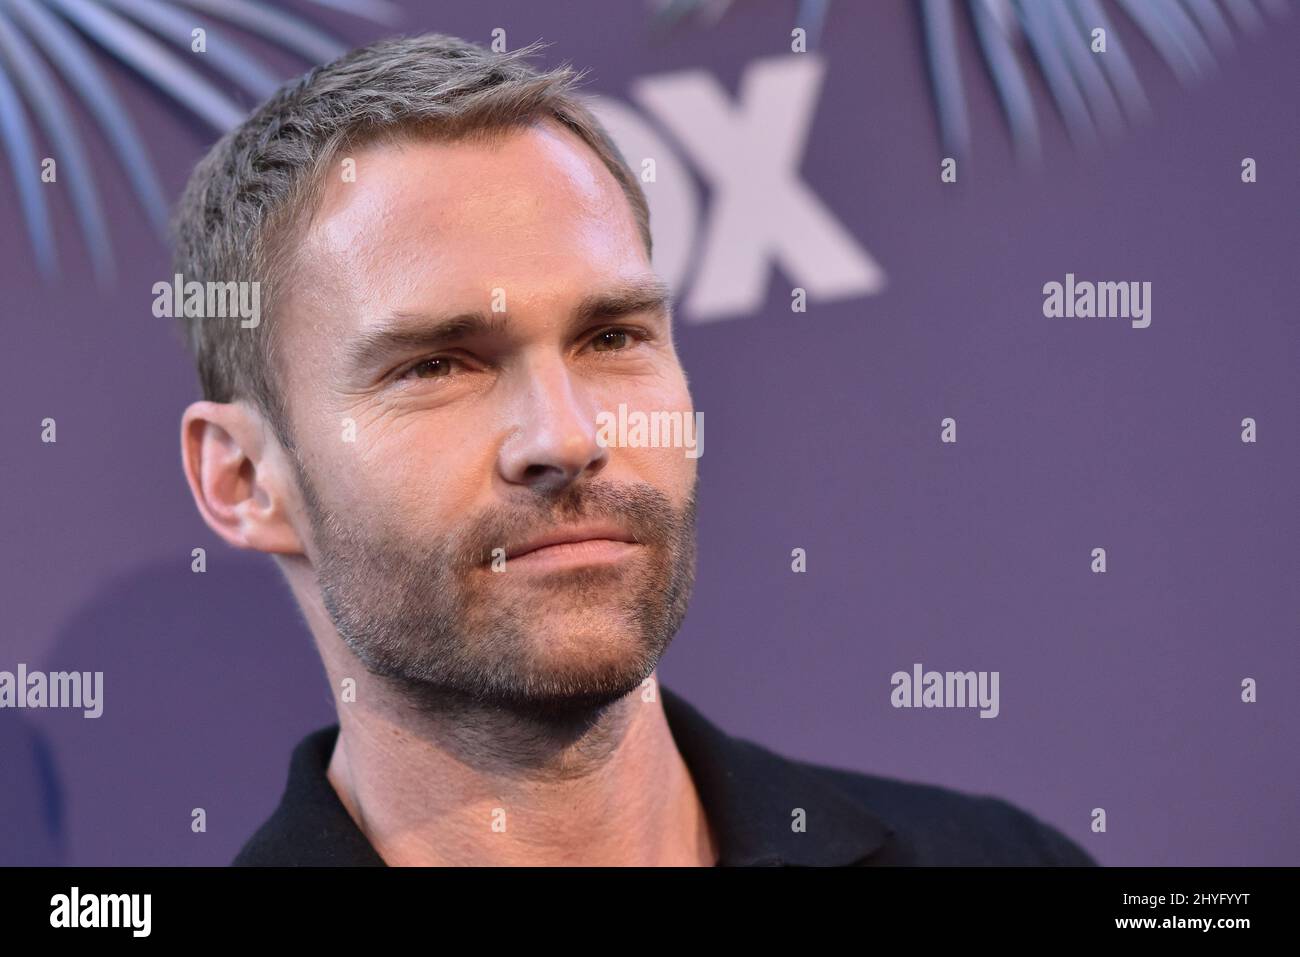 Seann William Scott at the FOX Summer TCA 2018 All-Star Party held at SoHo House Stock Photo